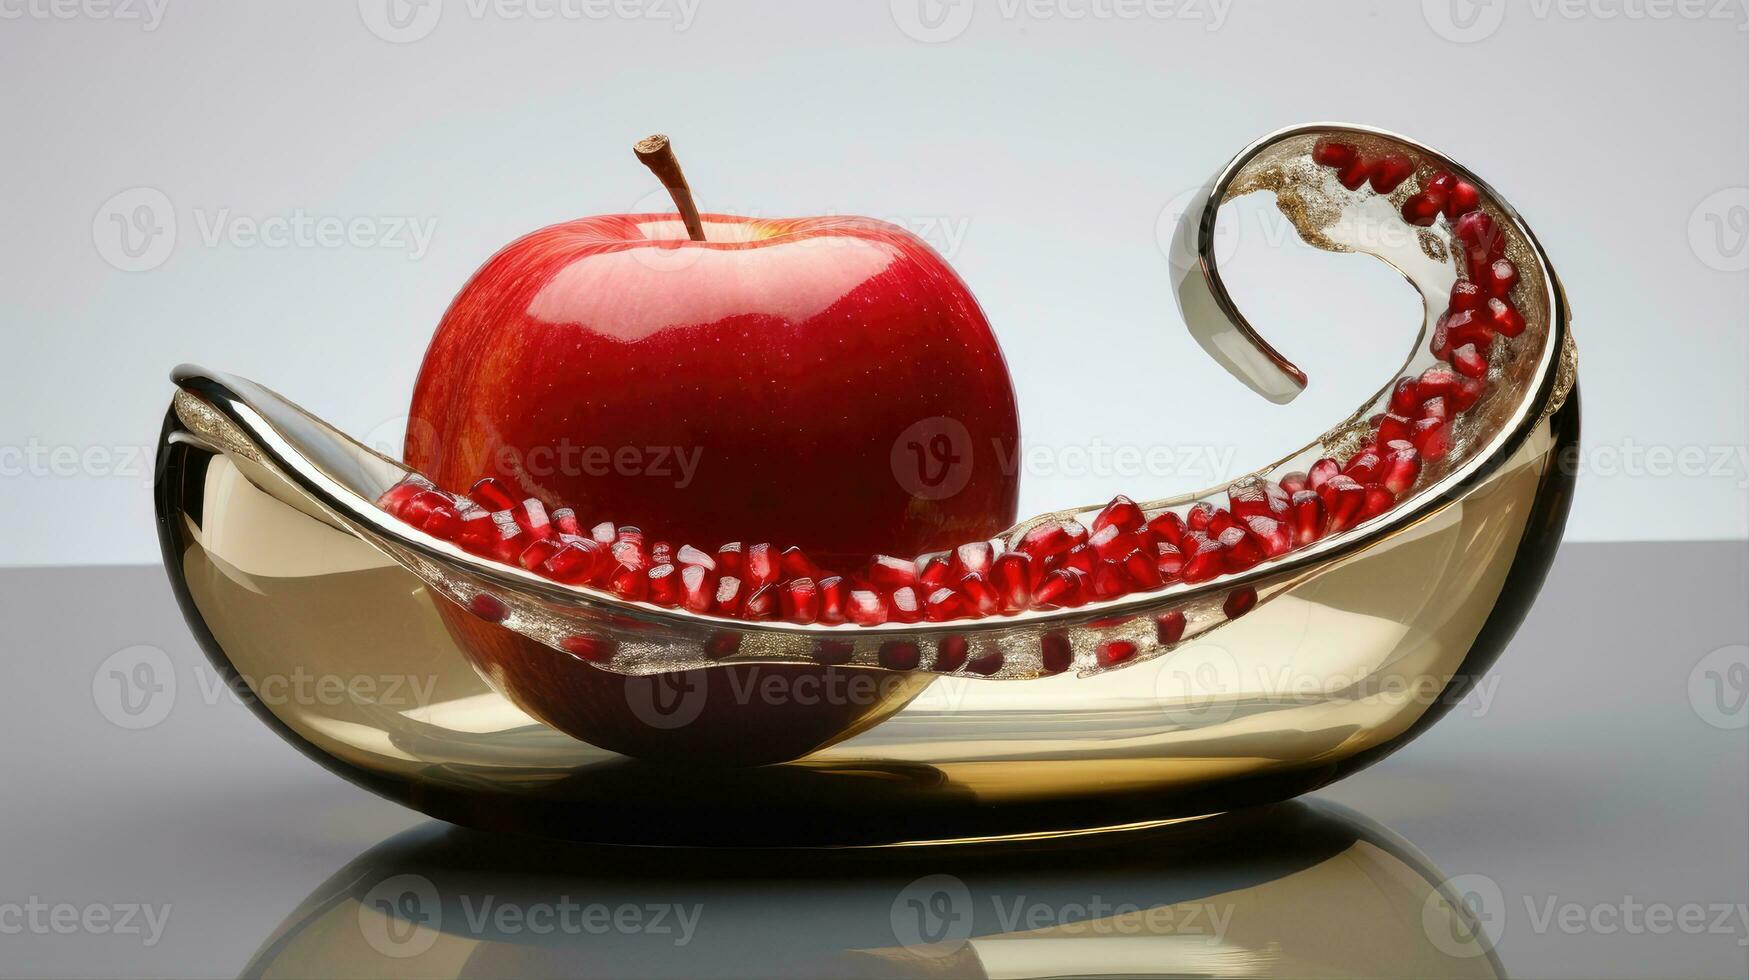 Rosh Hashanah is the concept of the Jewish holiday of the New Year. Bowl of apple with honey, pomegranate and candles are traditional symbols of the holiday. 3D rendering photo